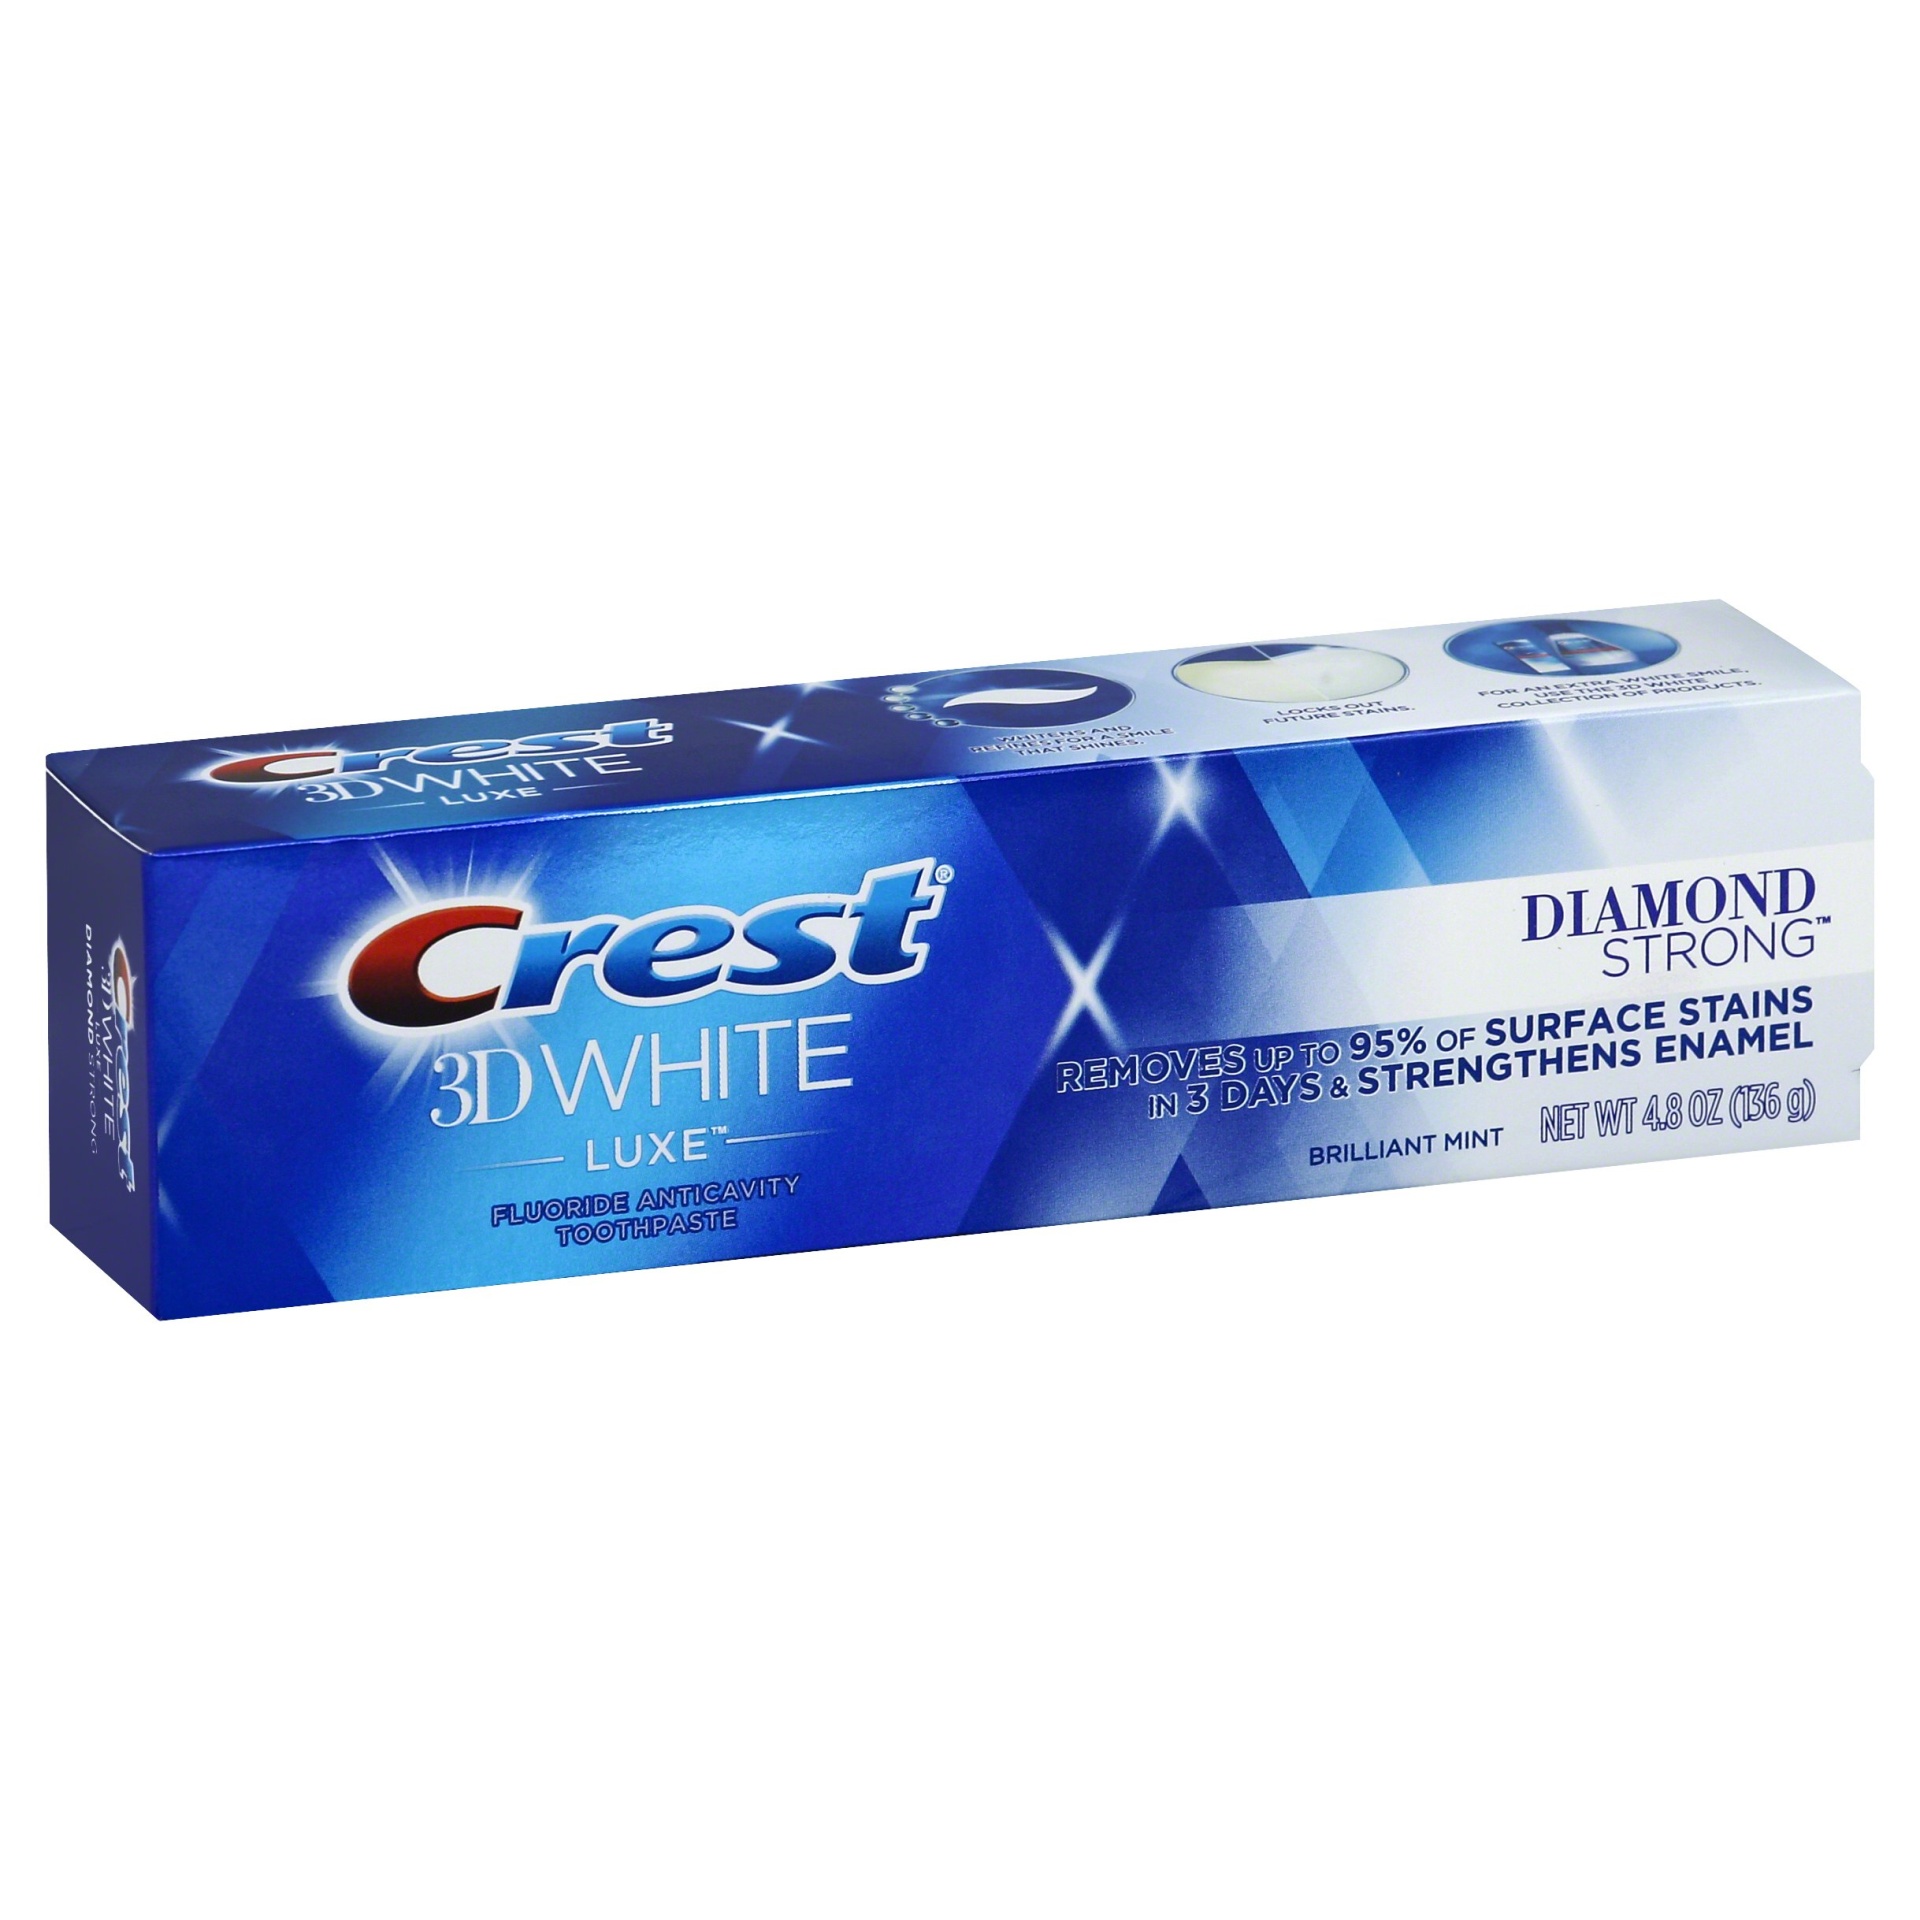 slide 1 of 4, Crest 3D White Luxe Diamond Strong Toothpaste, 4.8 oz